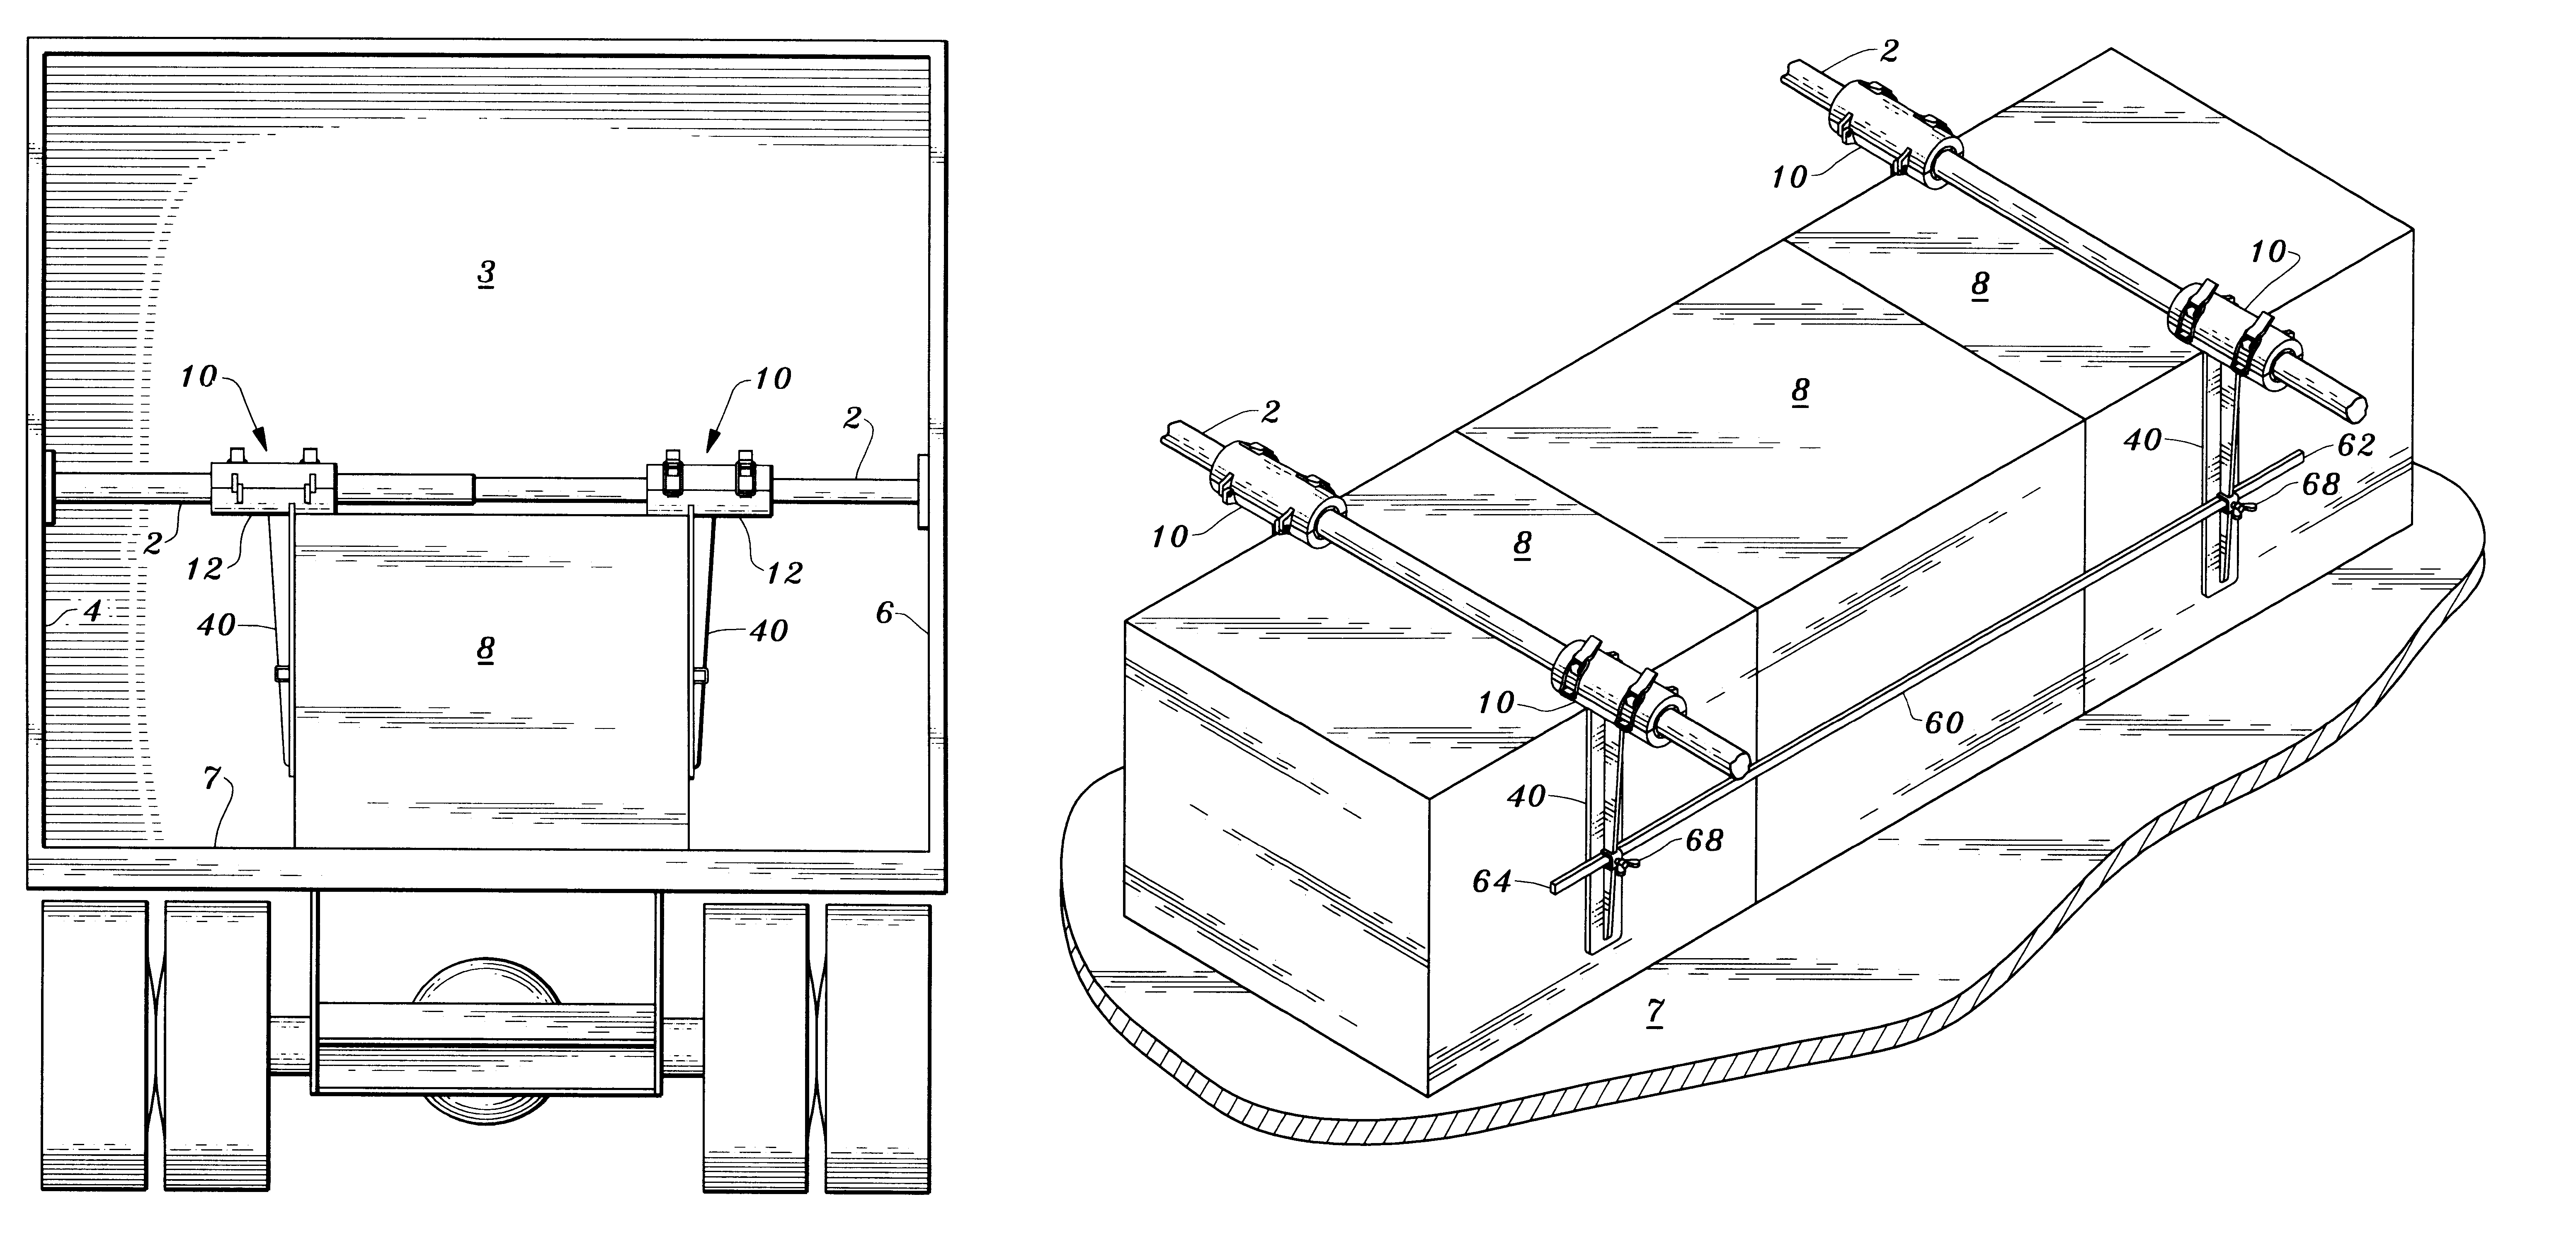 Lateral vehicle cargo restraint tool